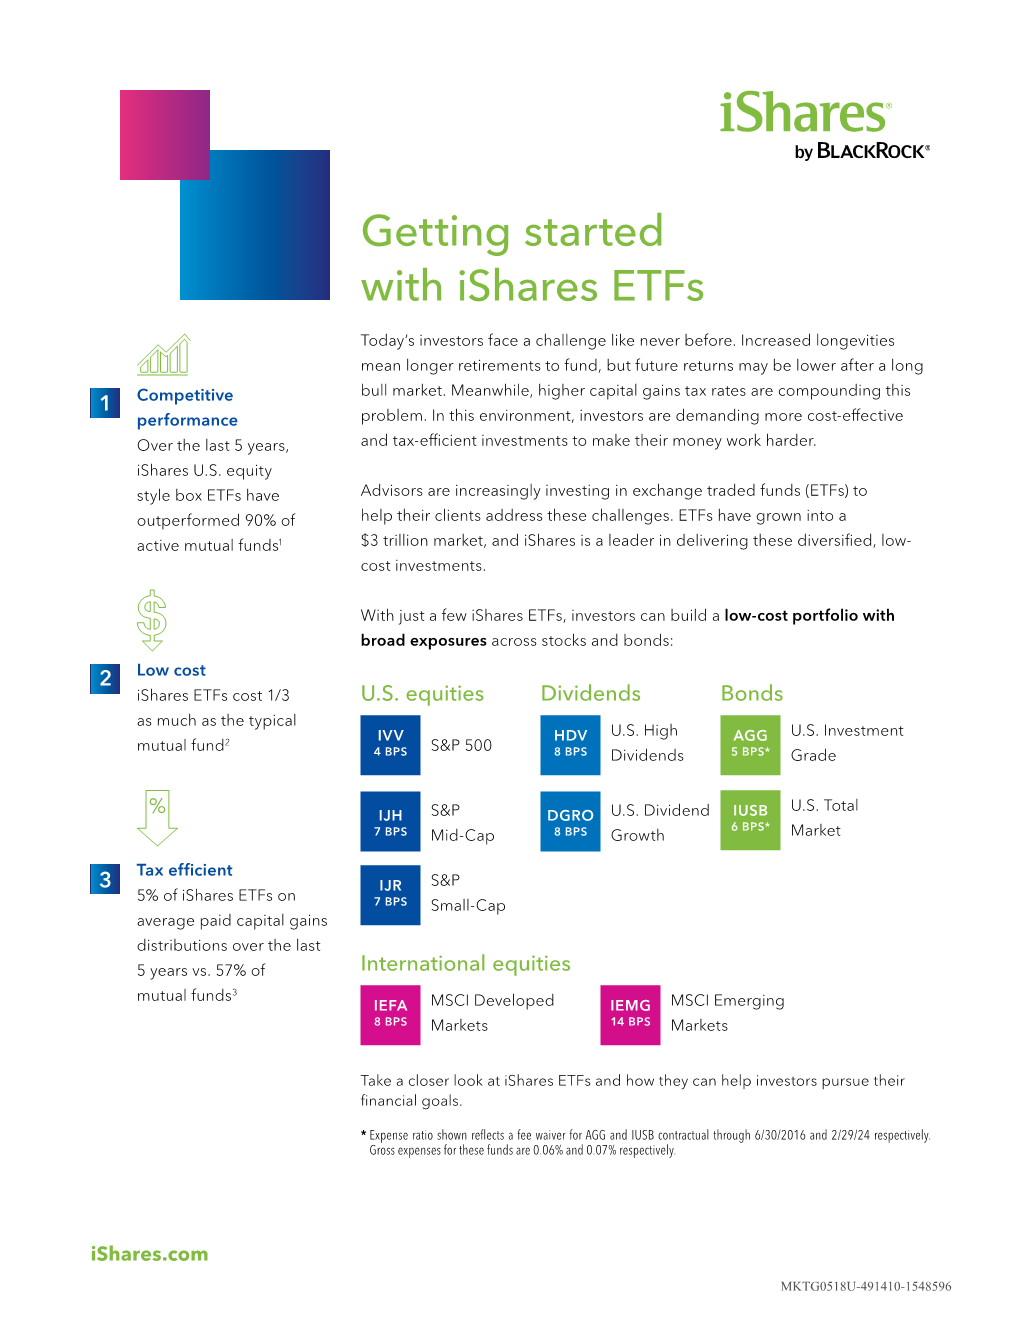 Getting Started with Ishares Etfs